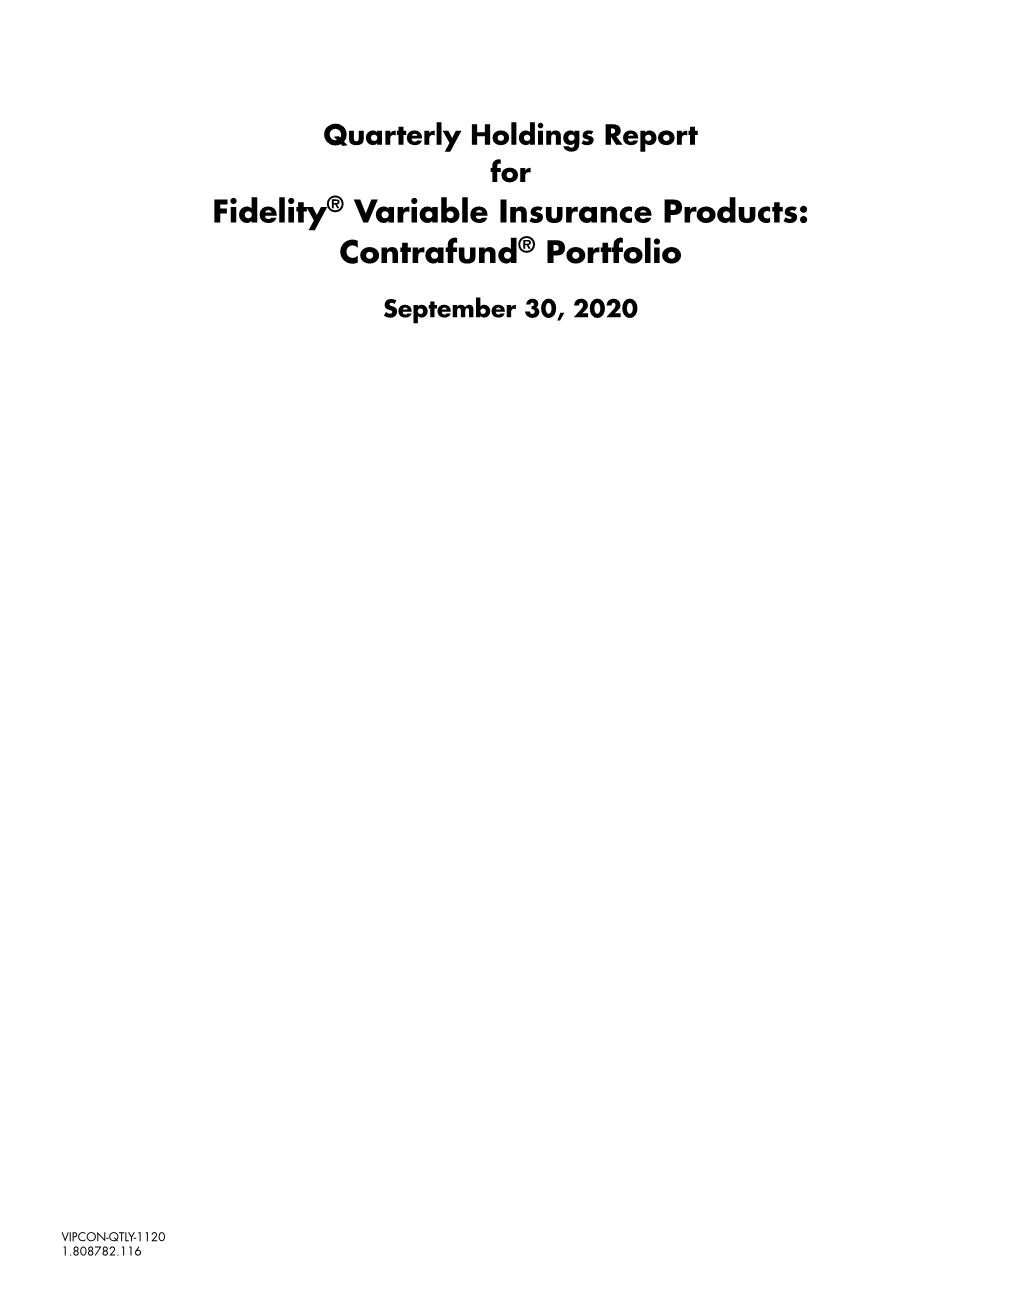 Fidelity® Variable Insurance Products: Contrafund® Portfolio